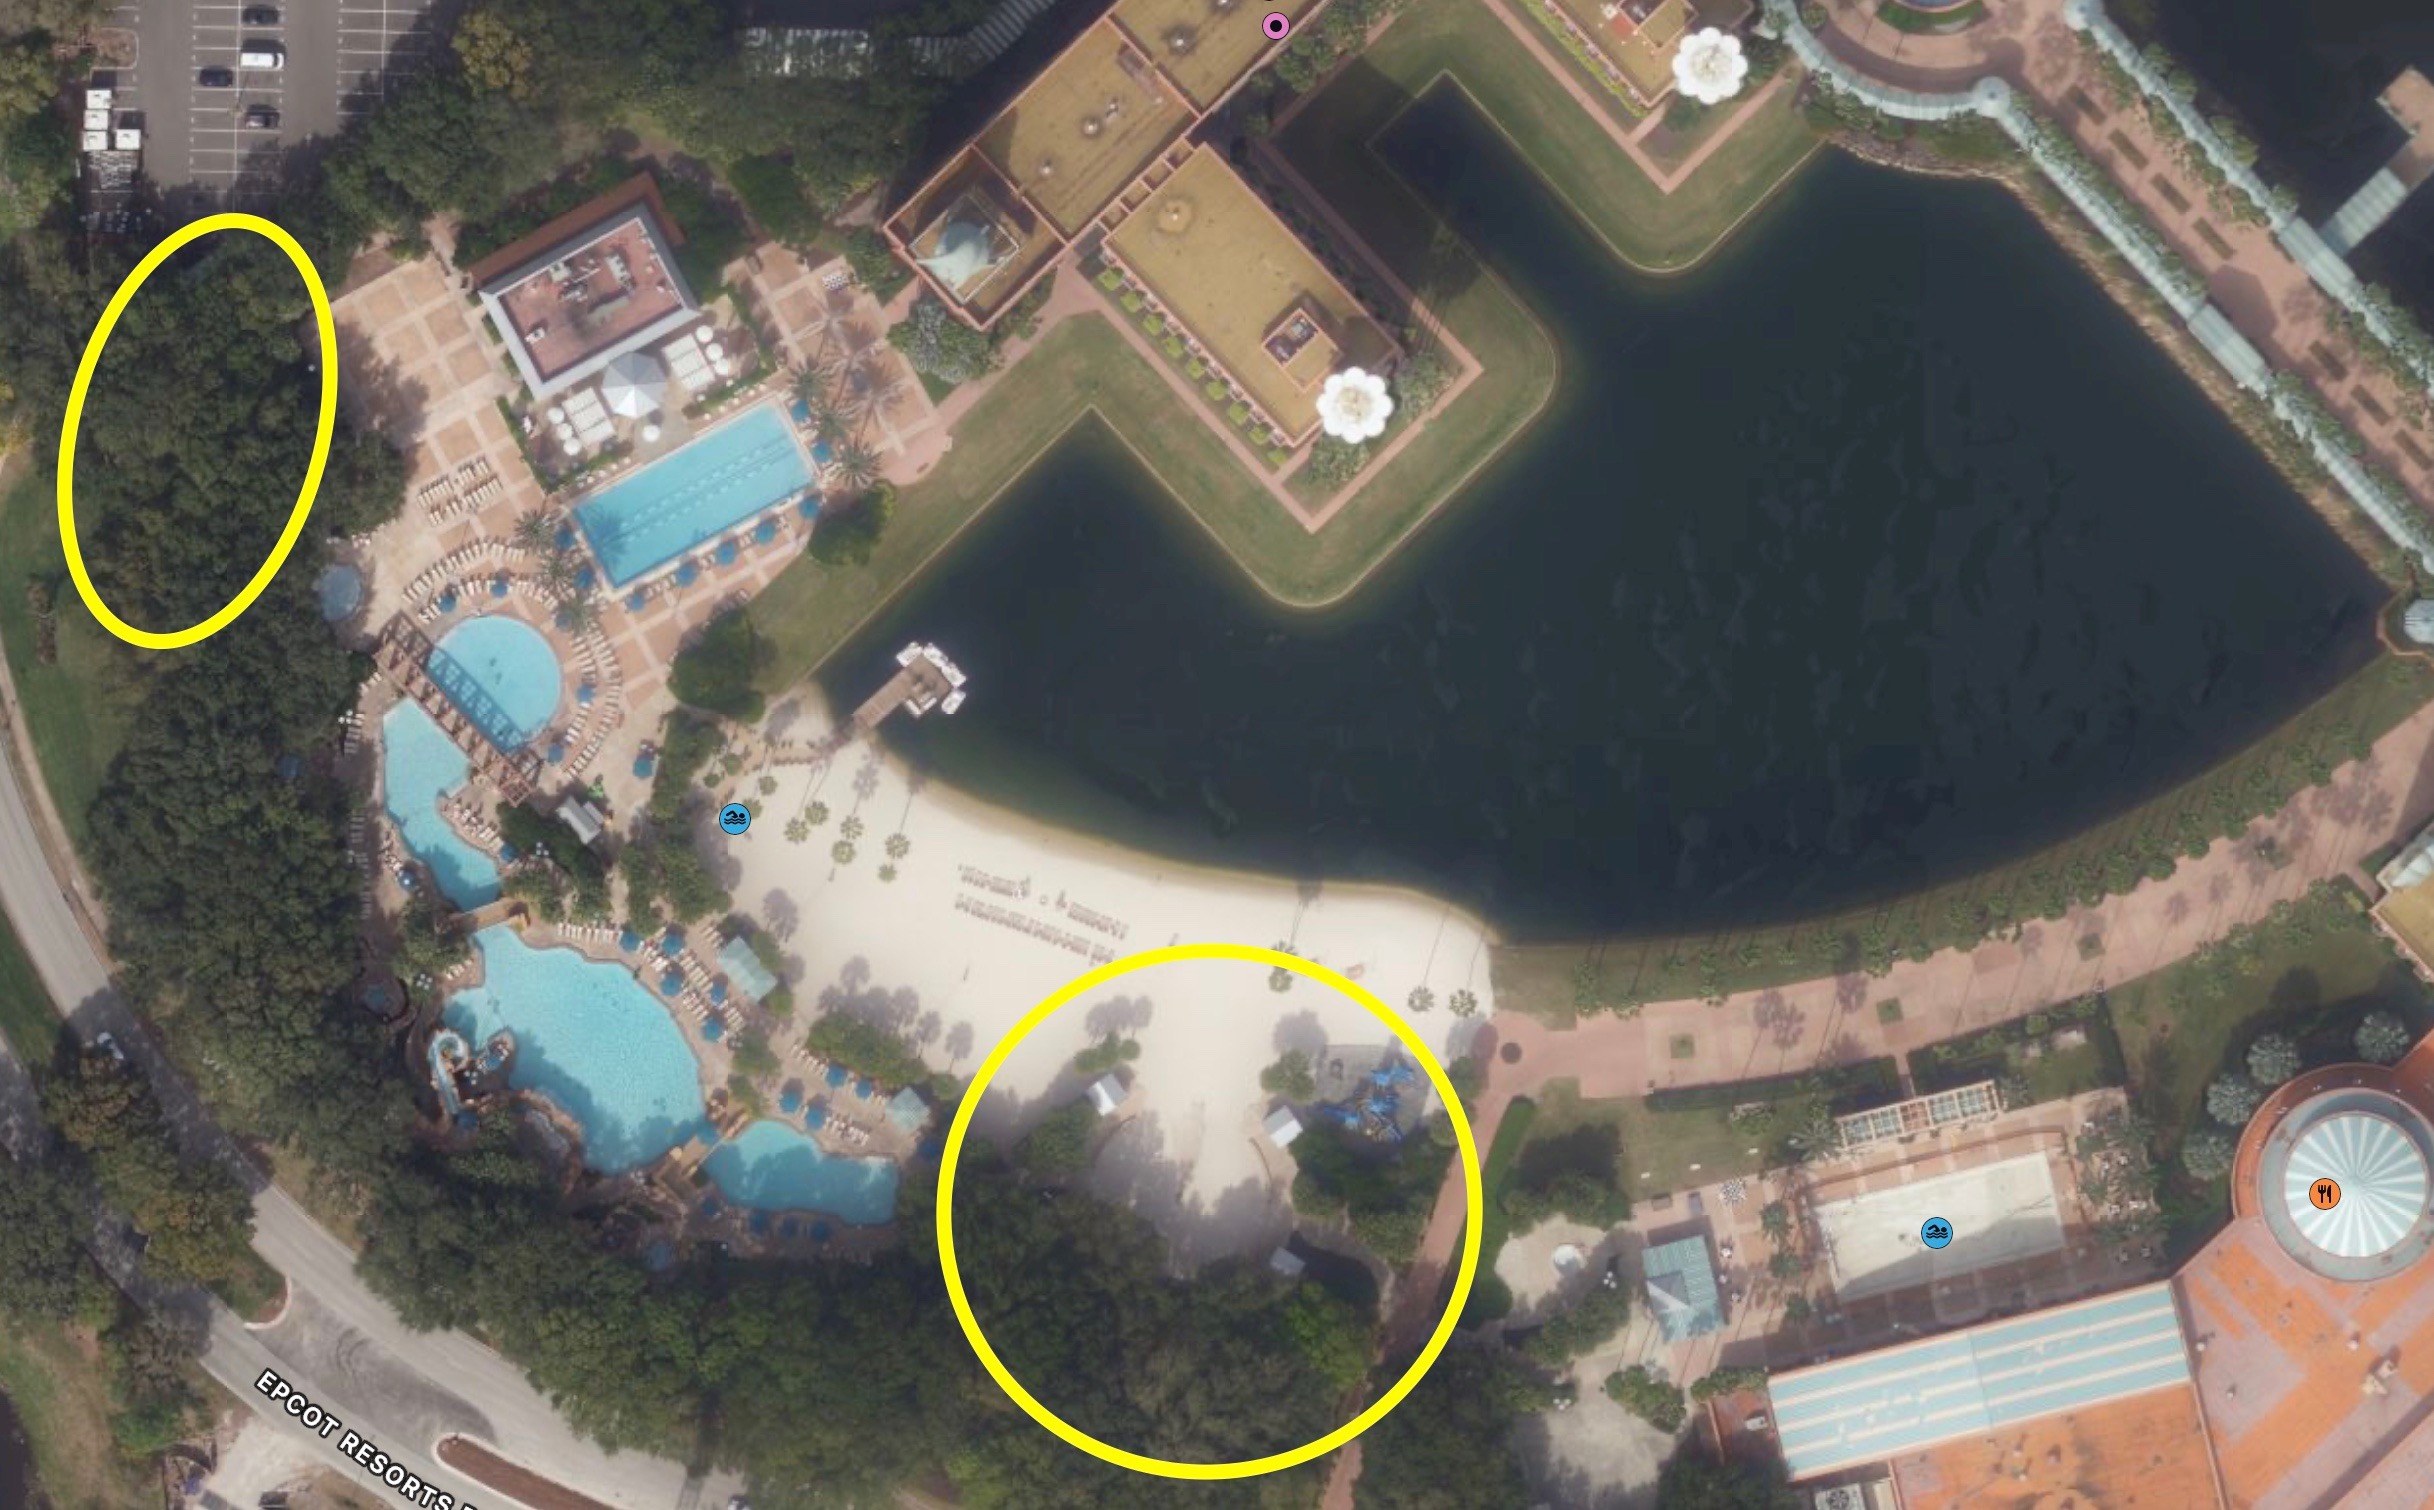 Walt Disney World Swan and Dolphin files permit to greatly expand its pool and recreation area